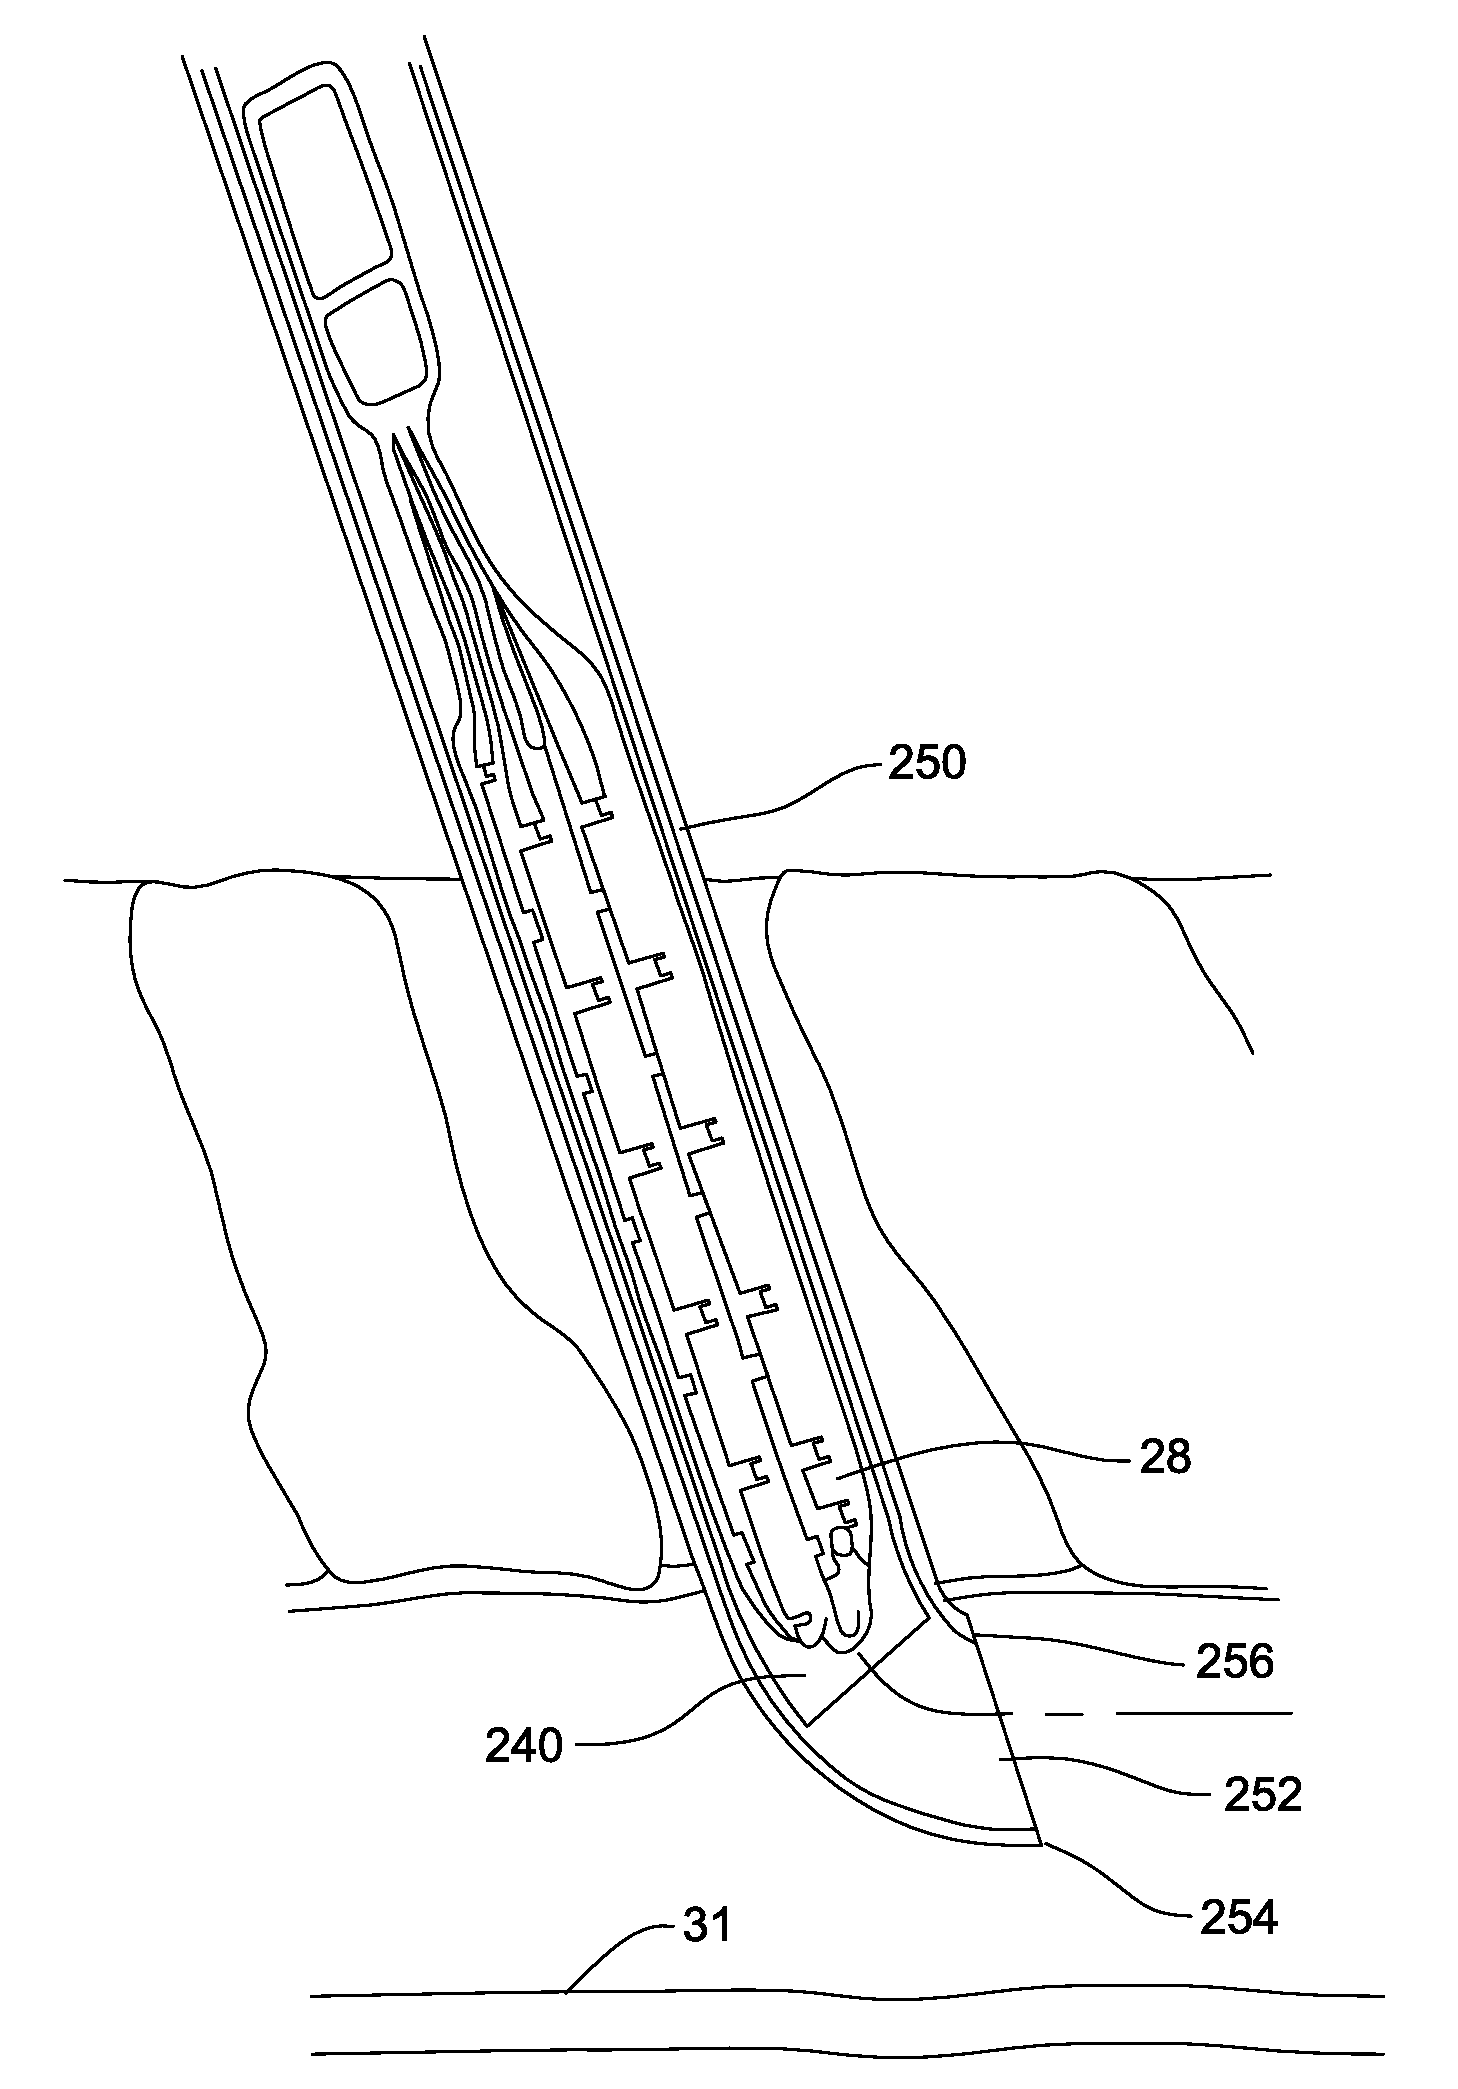 Foldable, implantable electrode assembly and tool for implanting same